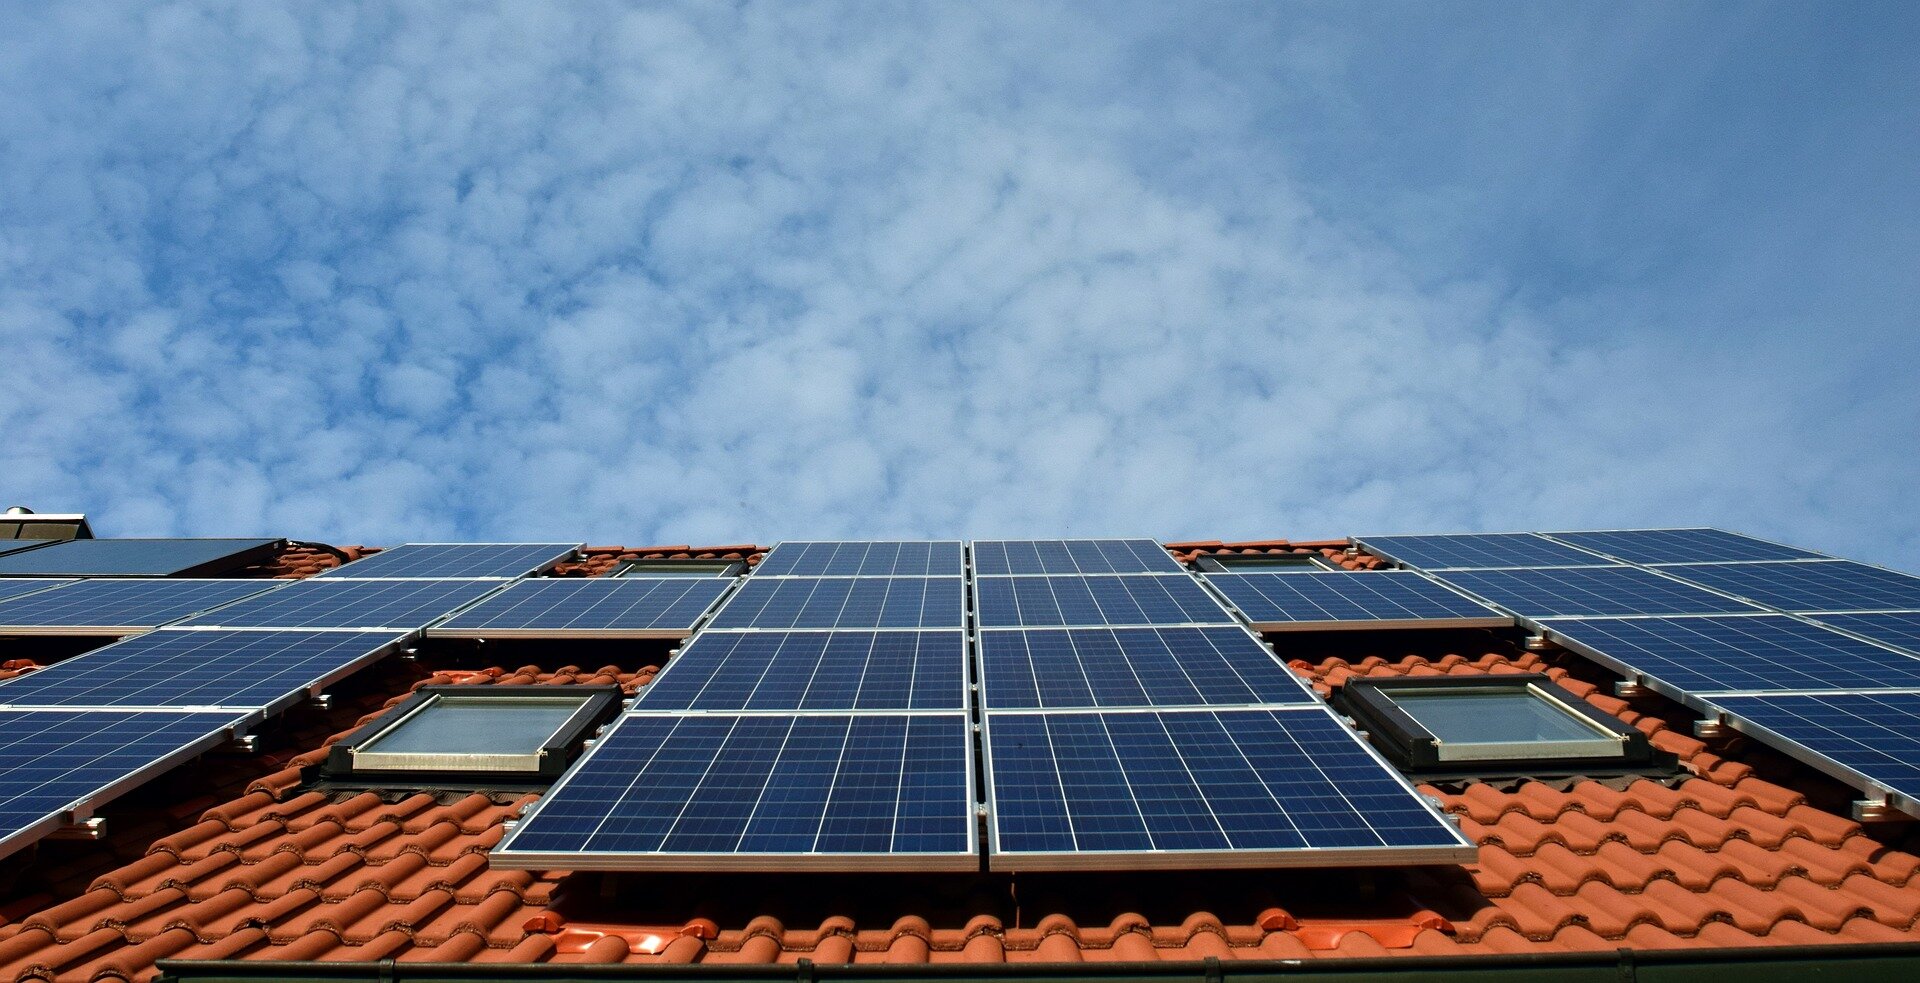 Recycling solar panels is difficult, but microwave technology can help -  The Washington Post